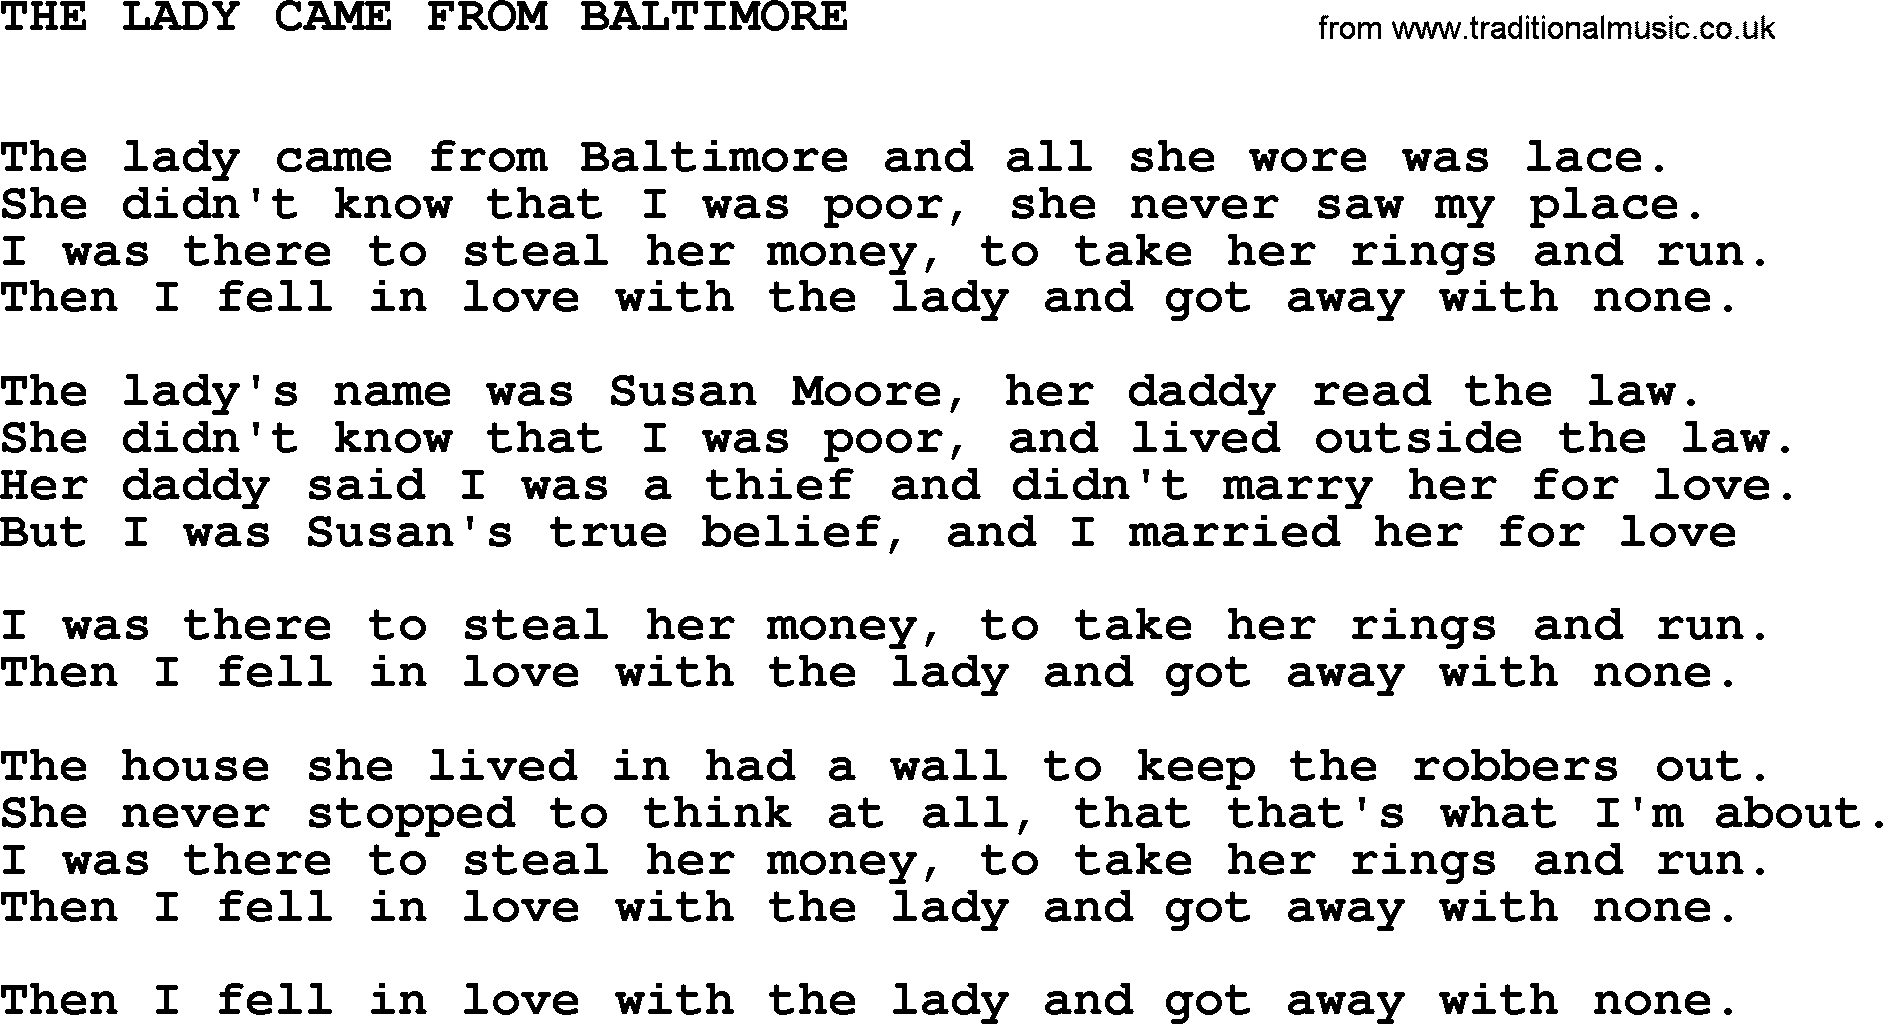 Johnny Cash song The Lady Came From Baltimore.txt lyrics